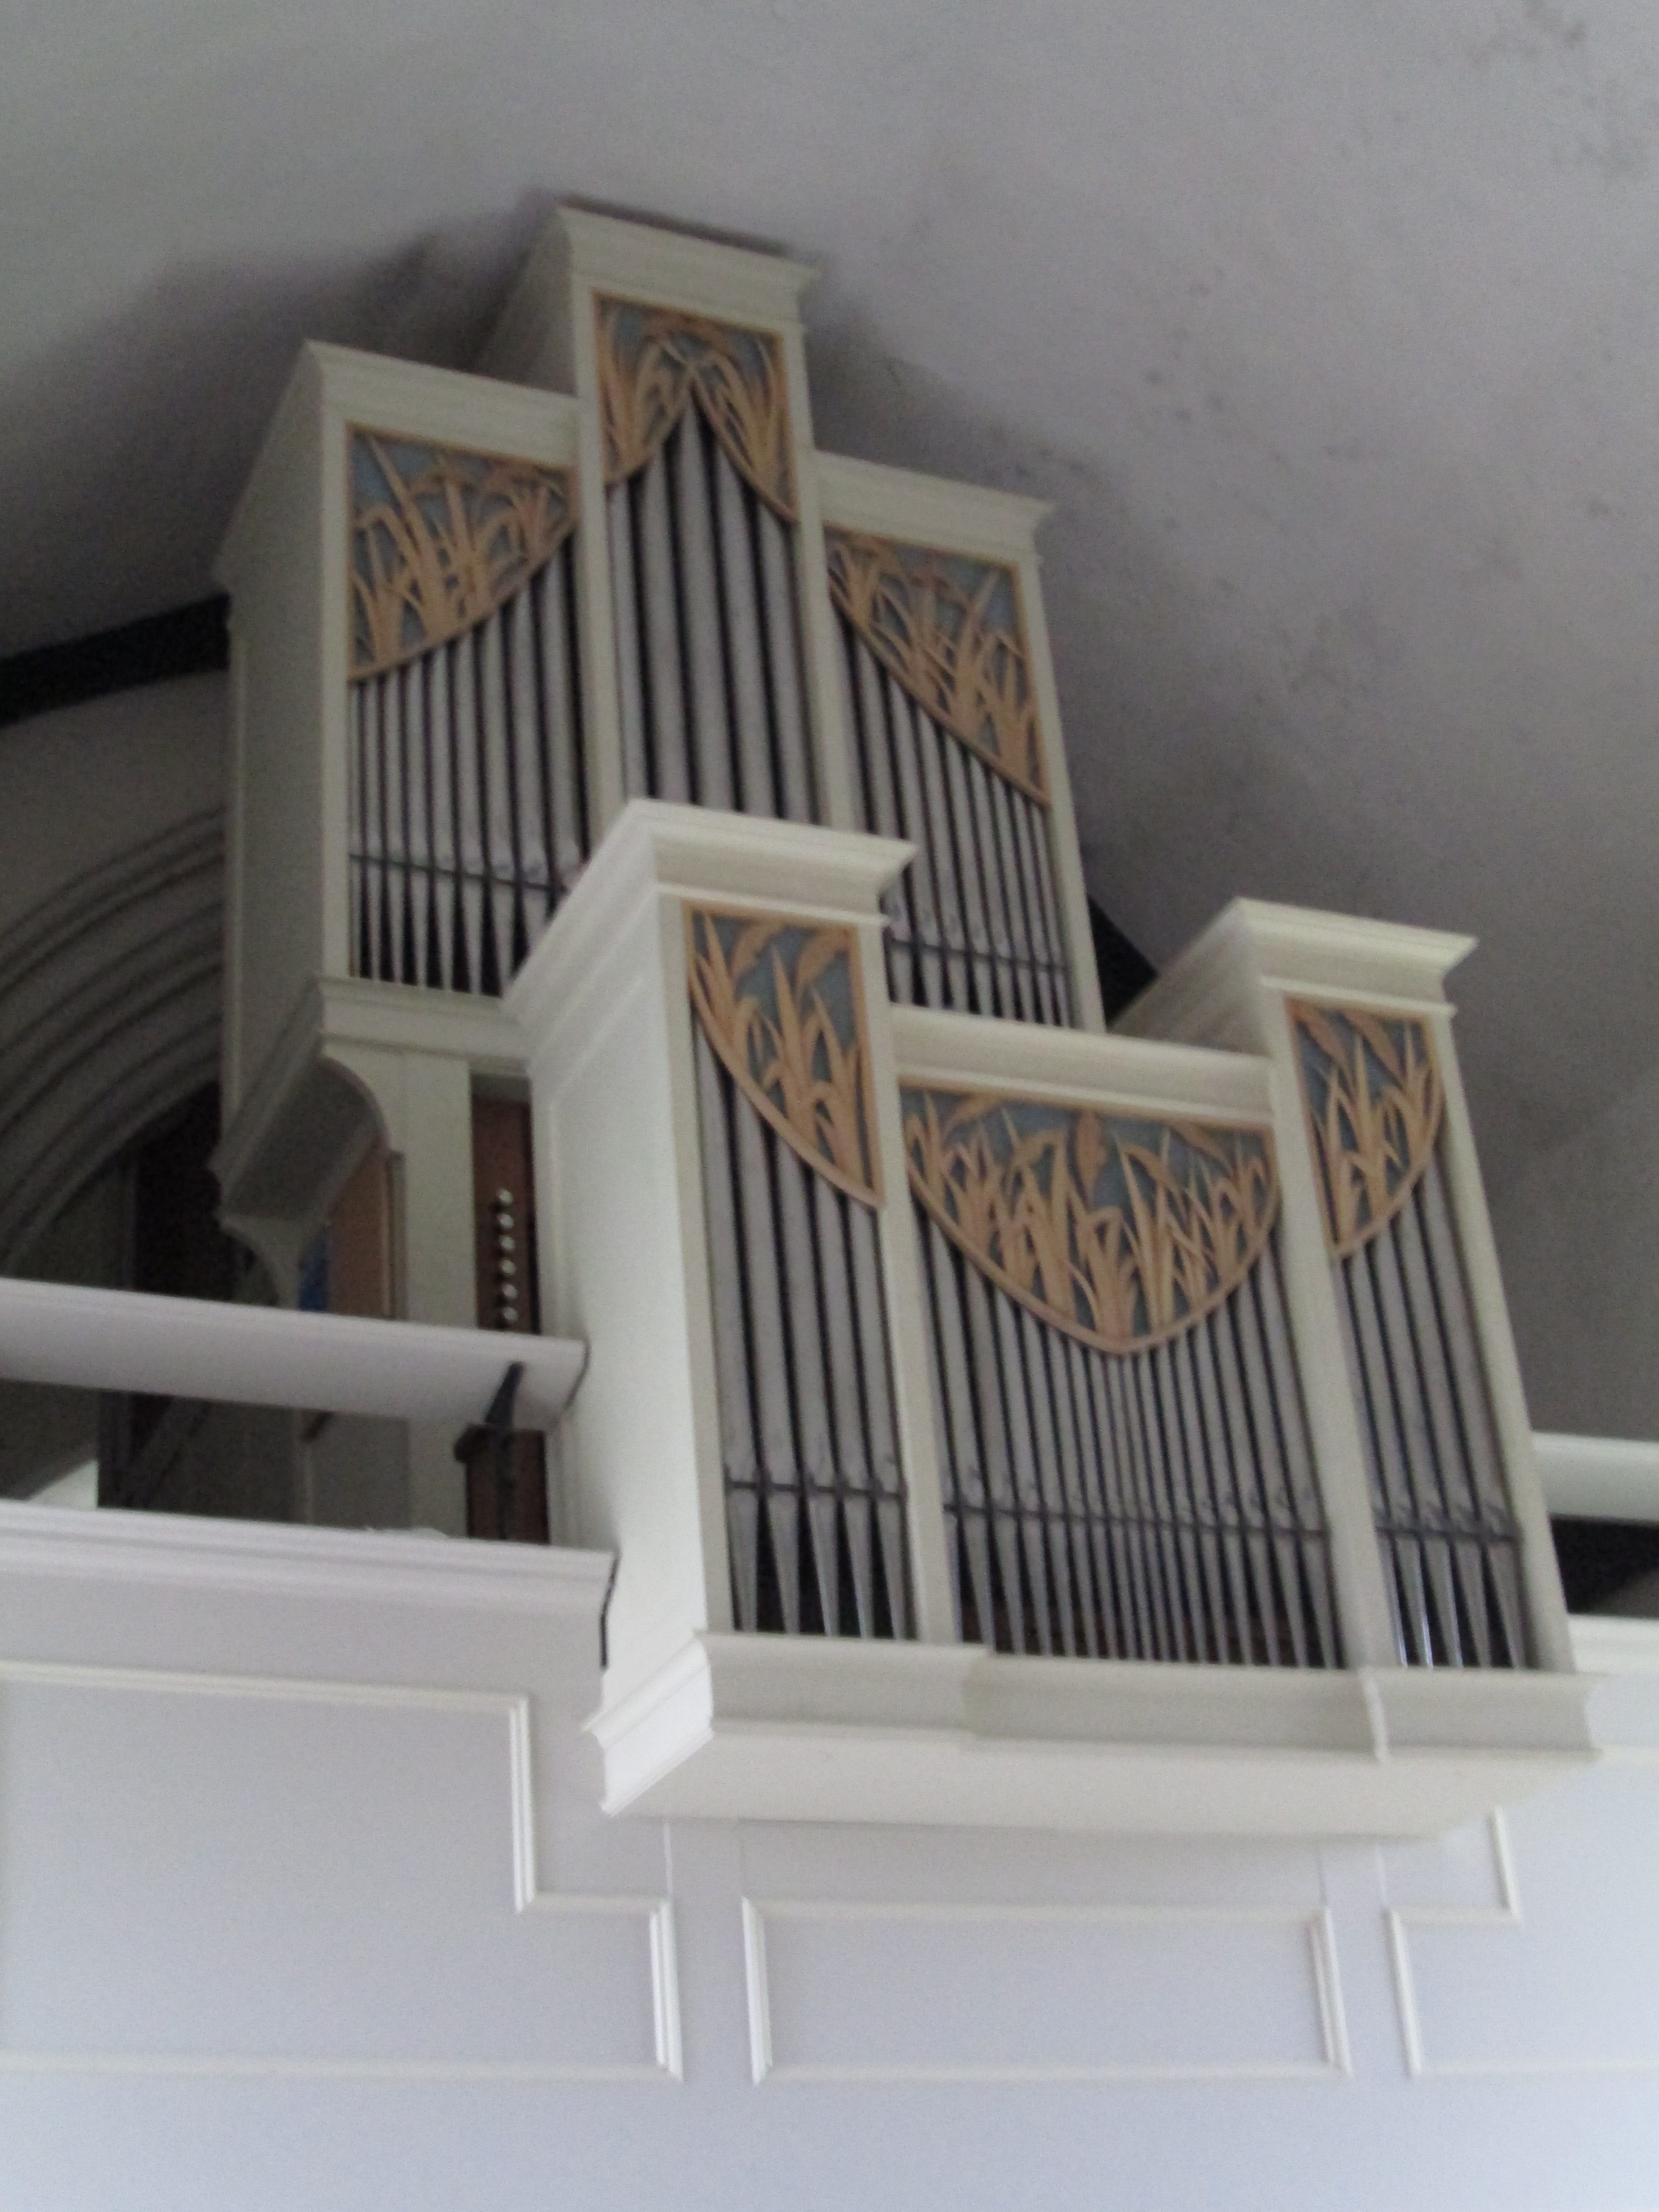 Organ installed for the Millennium in 2000